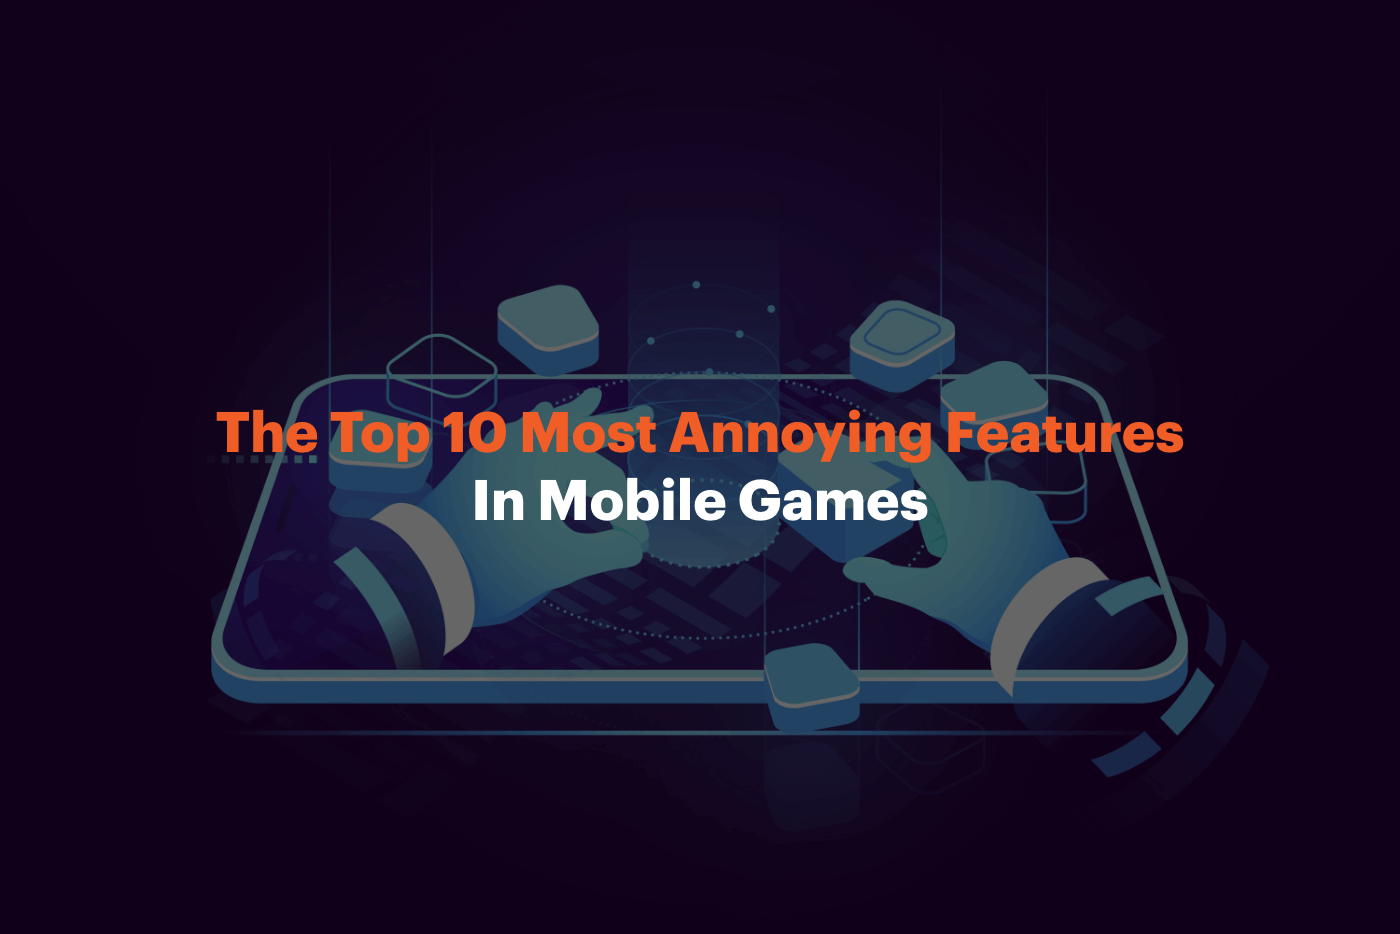 The Top 10 Most Annoying Features in Mobile Games